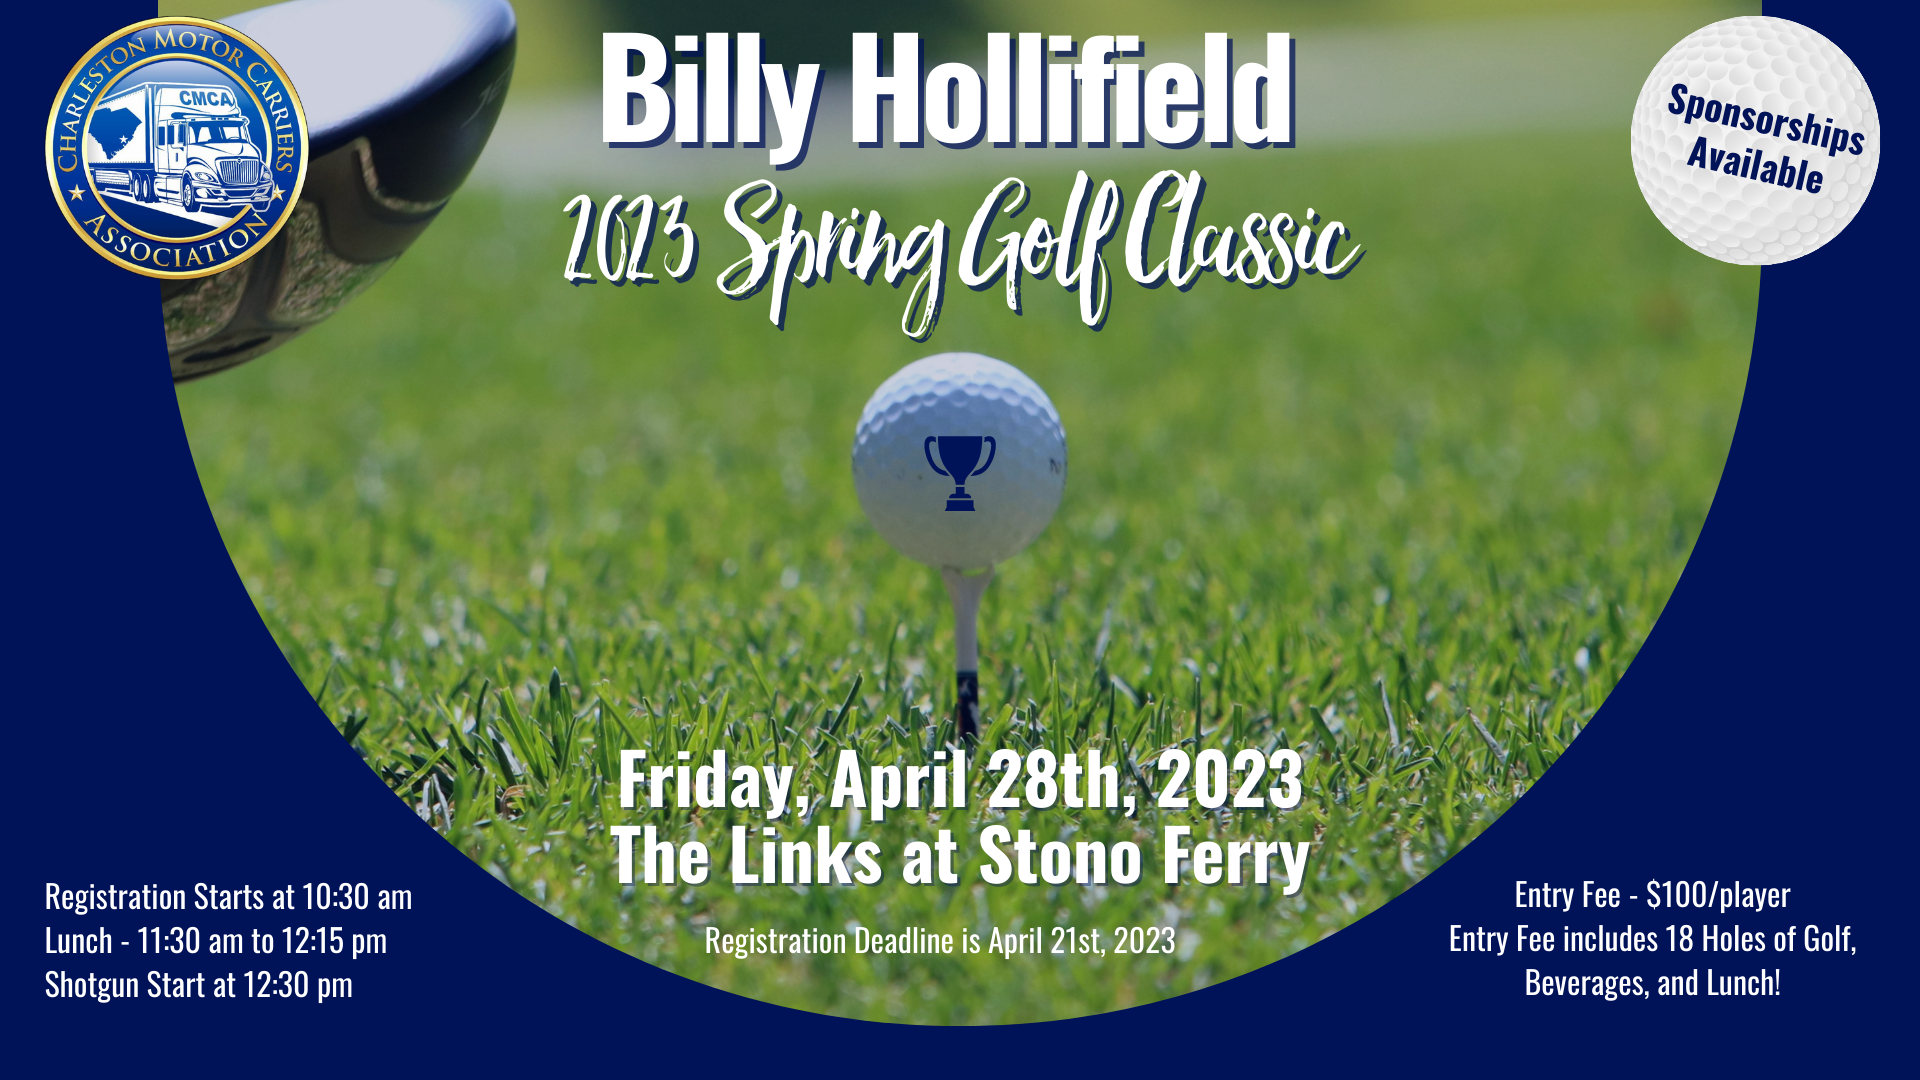 Billy Hollifield 2023 Spring Golf Classic